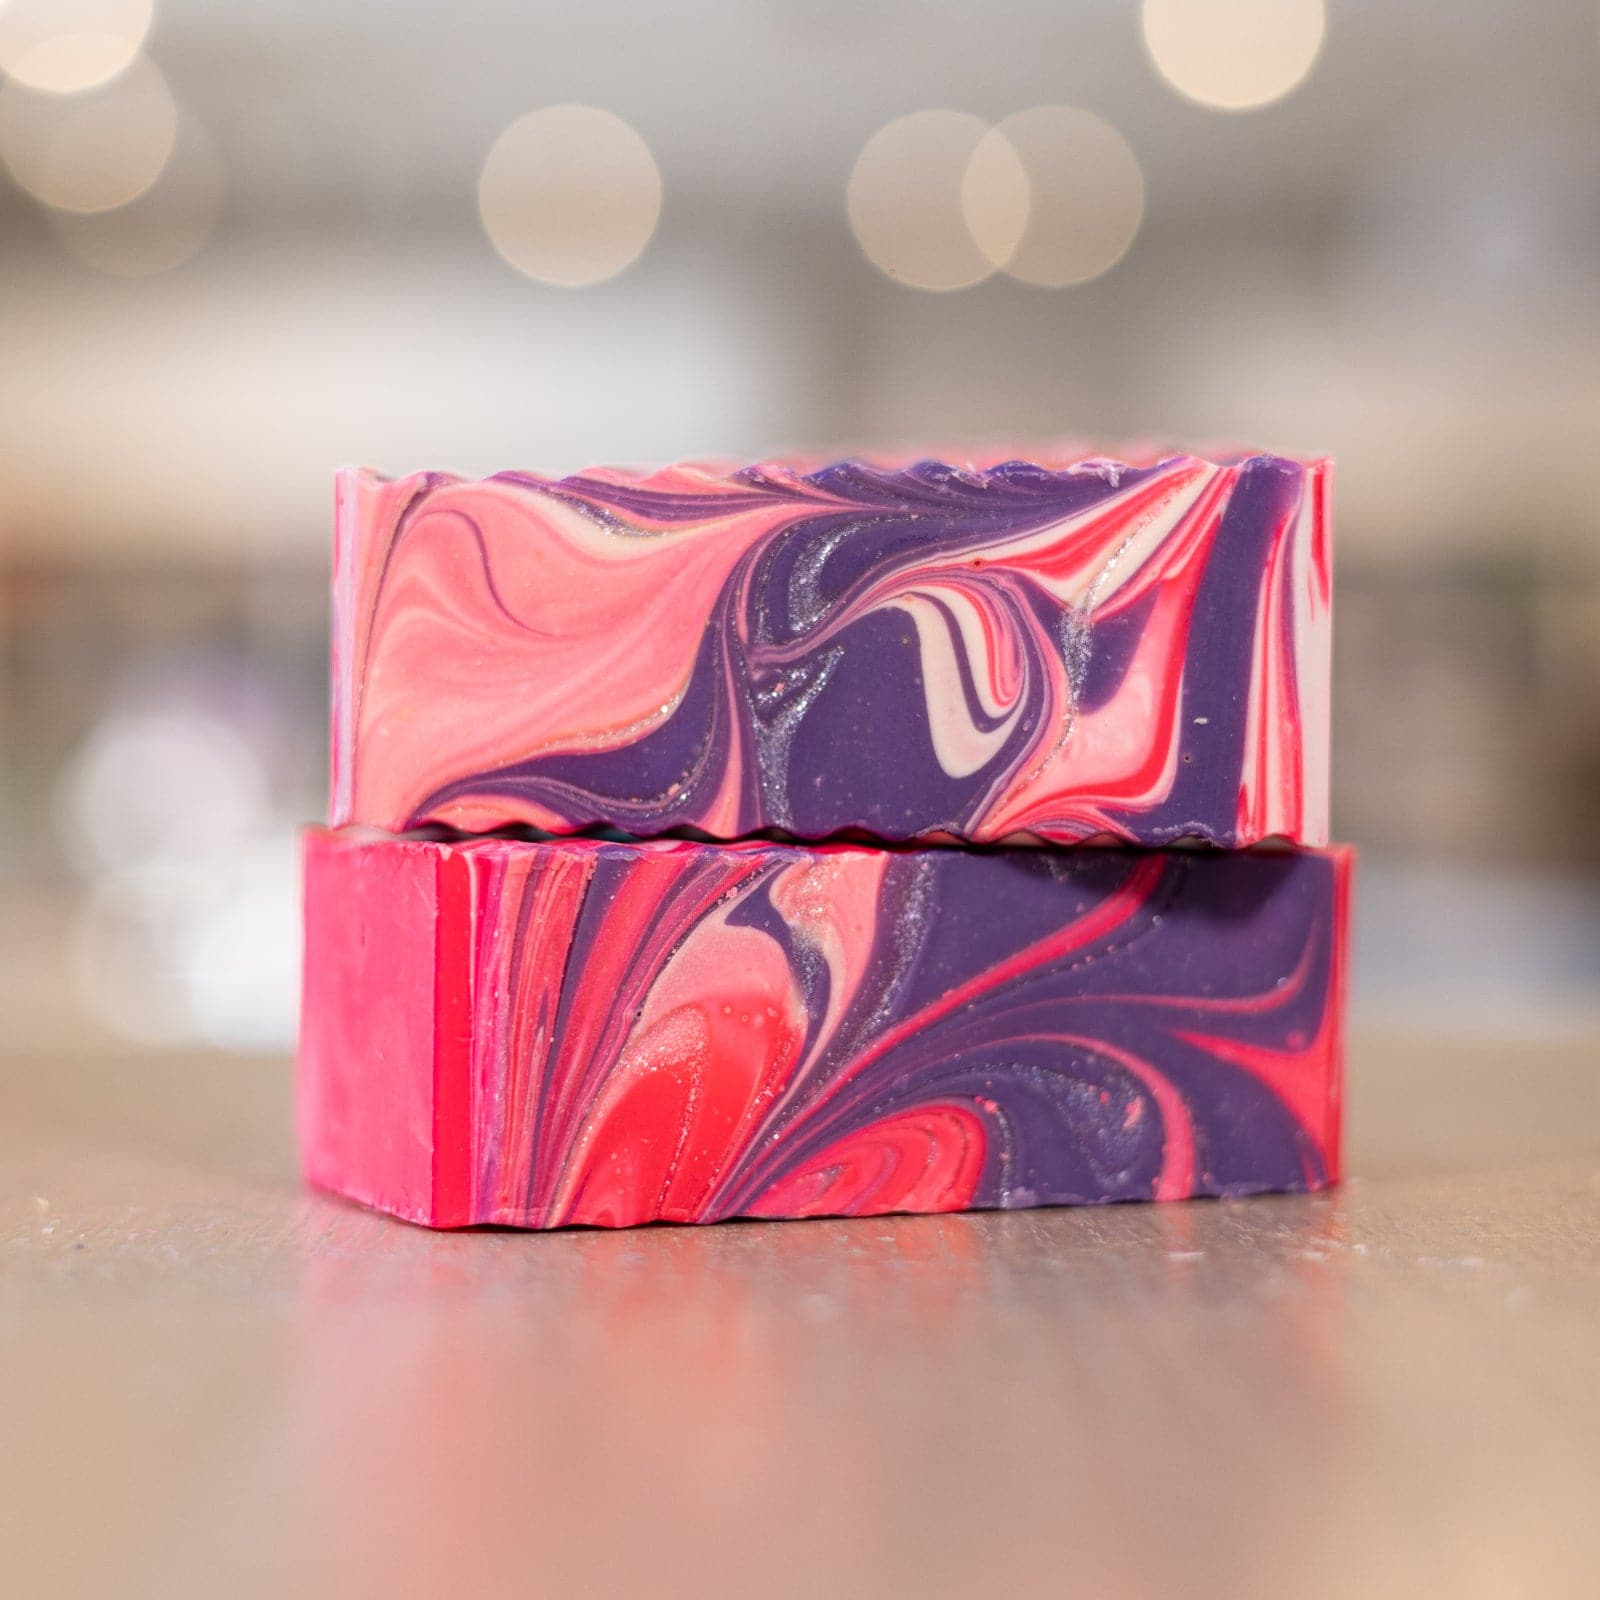 Two Unicorn Soap Bars with pink and purple design stacked on counter